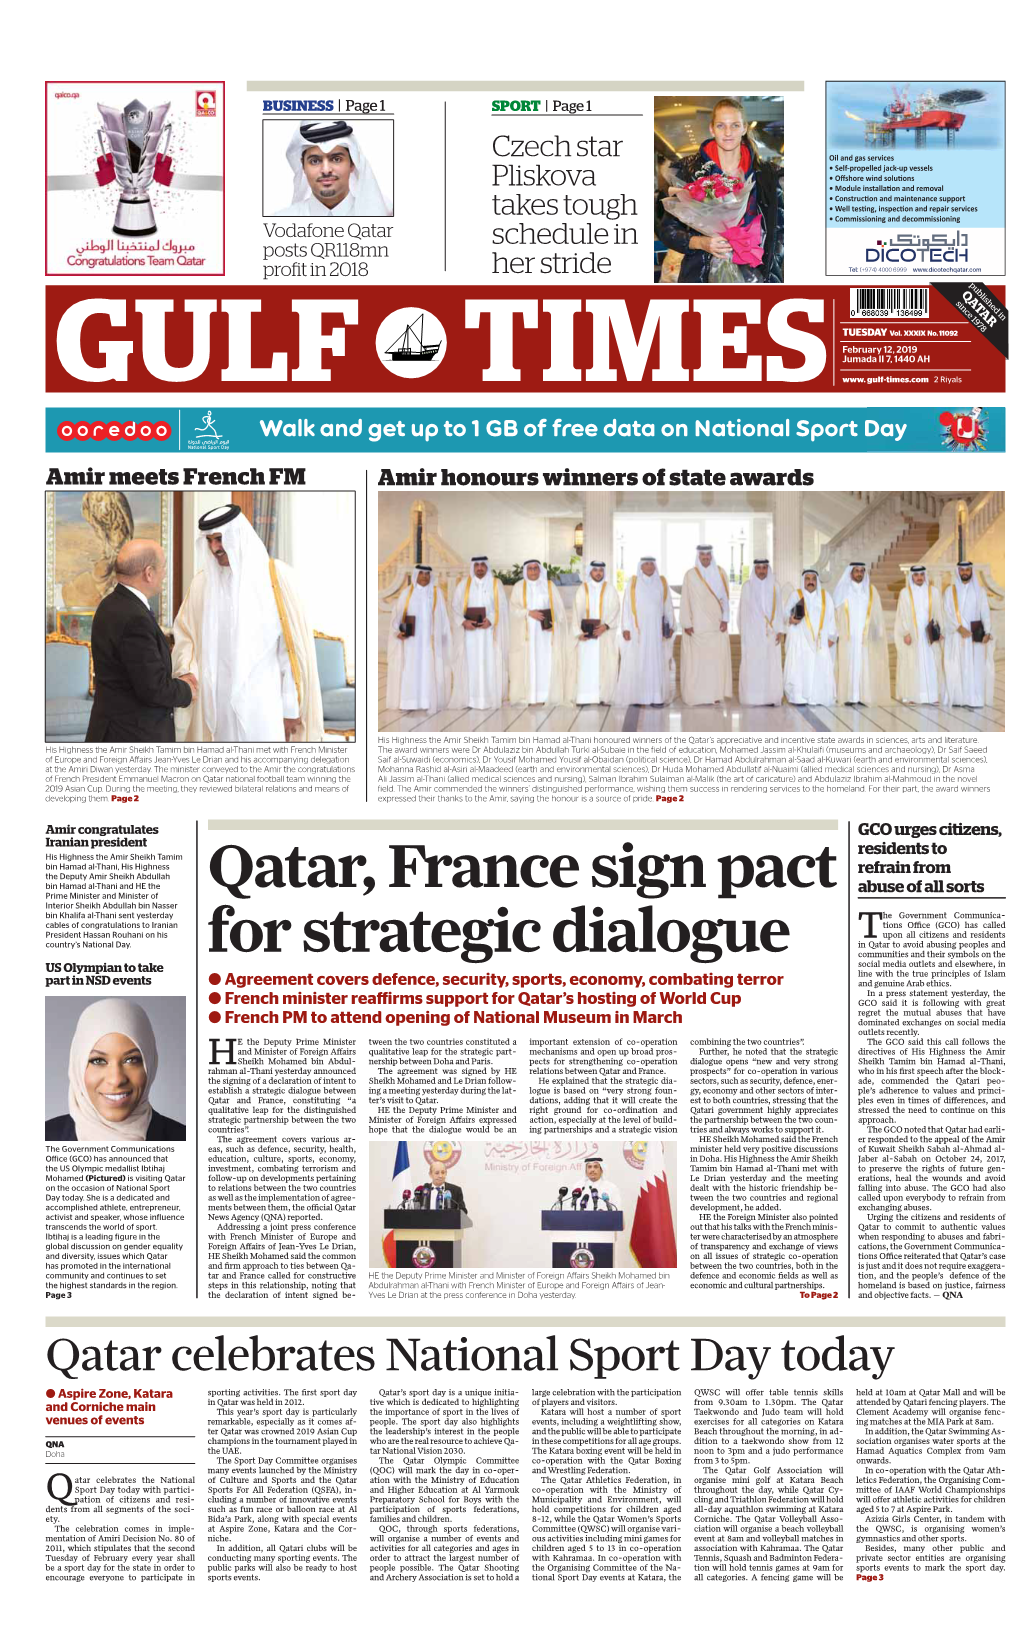 Qatar, France Sign Pact for Strategic Dialogue